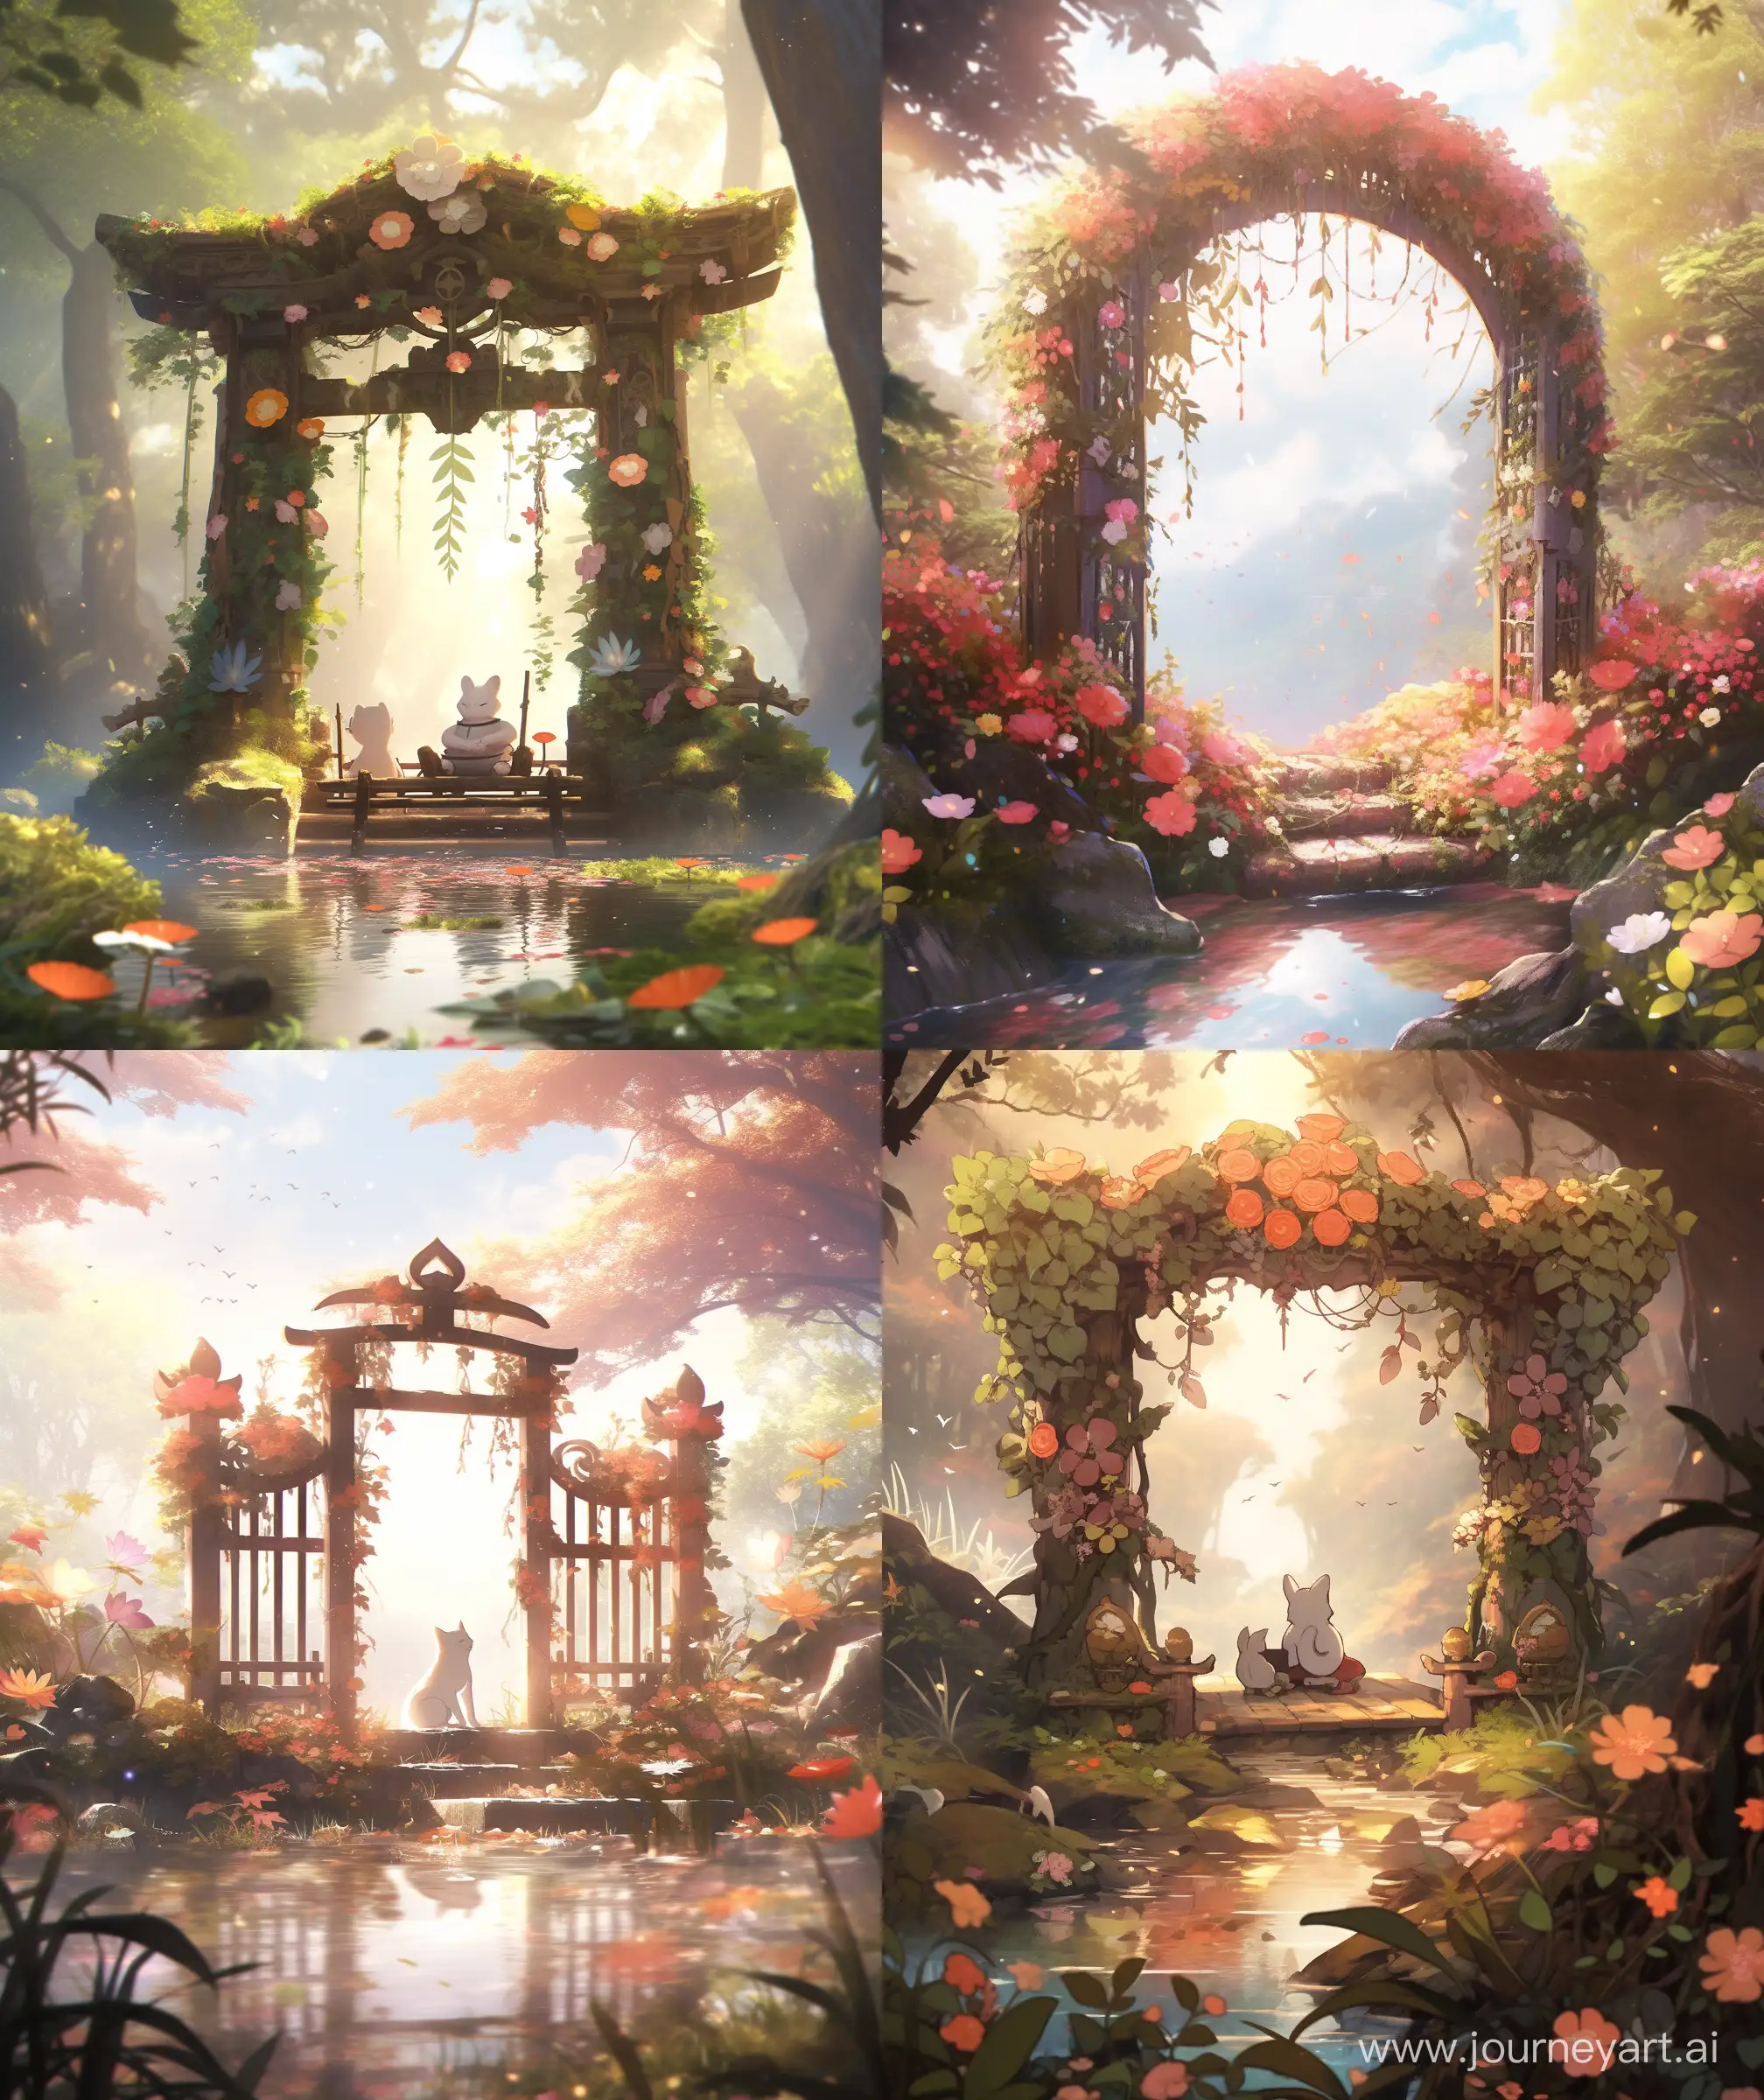 Enchanting-Anime-Scene-Torii-Gate-Amidst-Forest-Ruins-Blossoming-Flowers-Fairytale-Autumn-View-Lake-and-Boat-under-Glistening-Sunlight